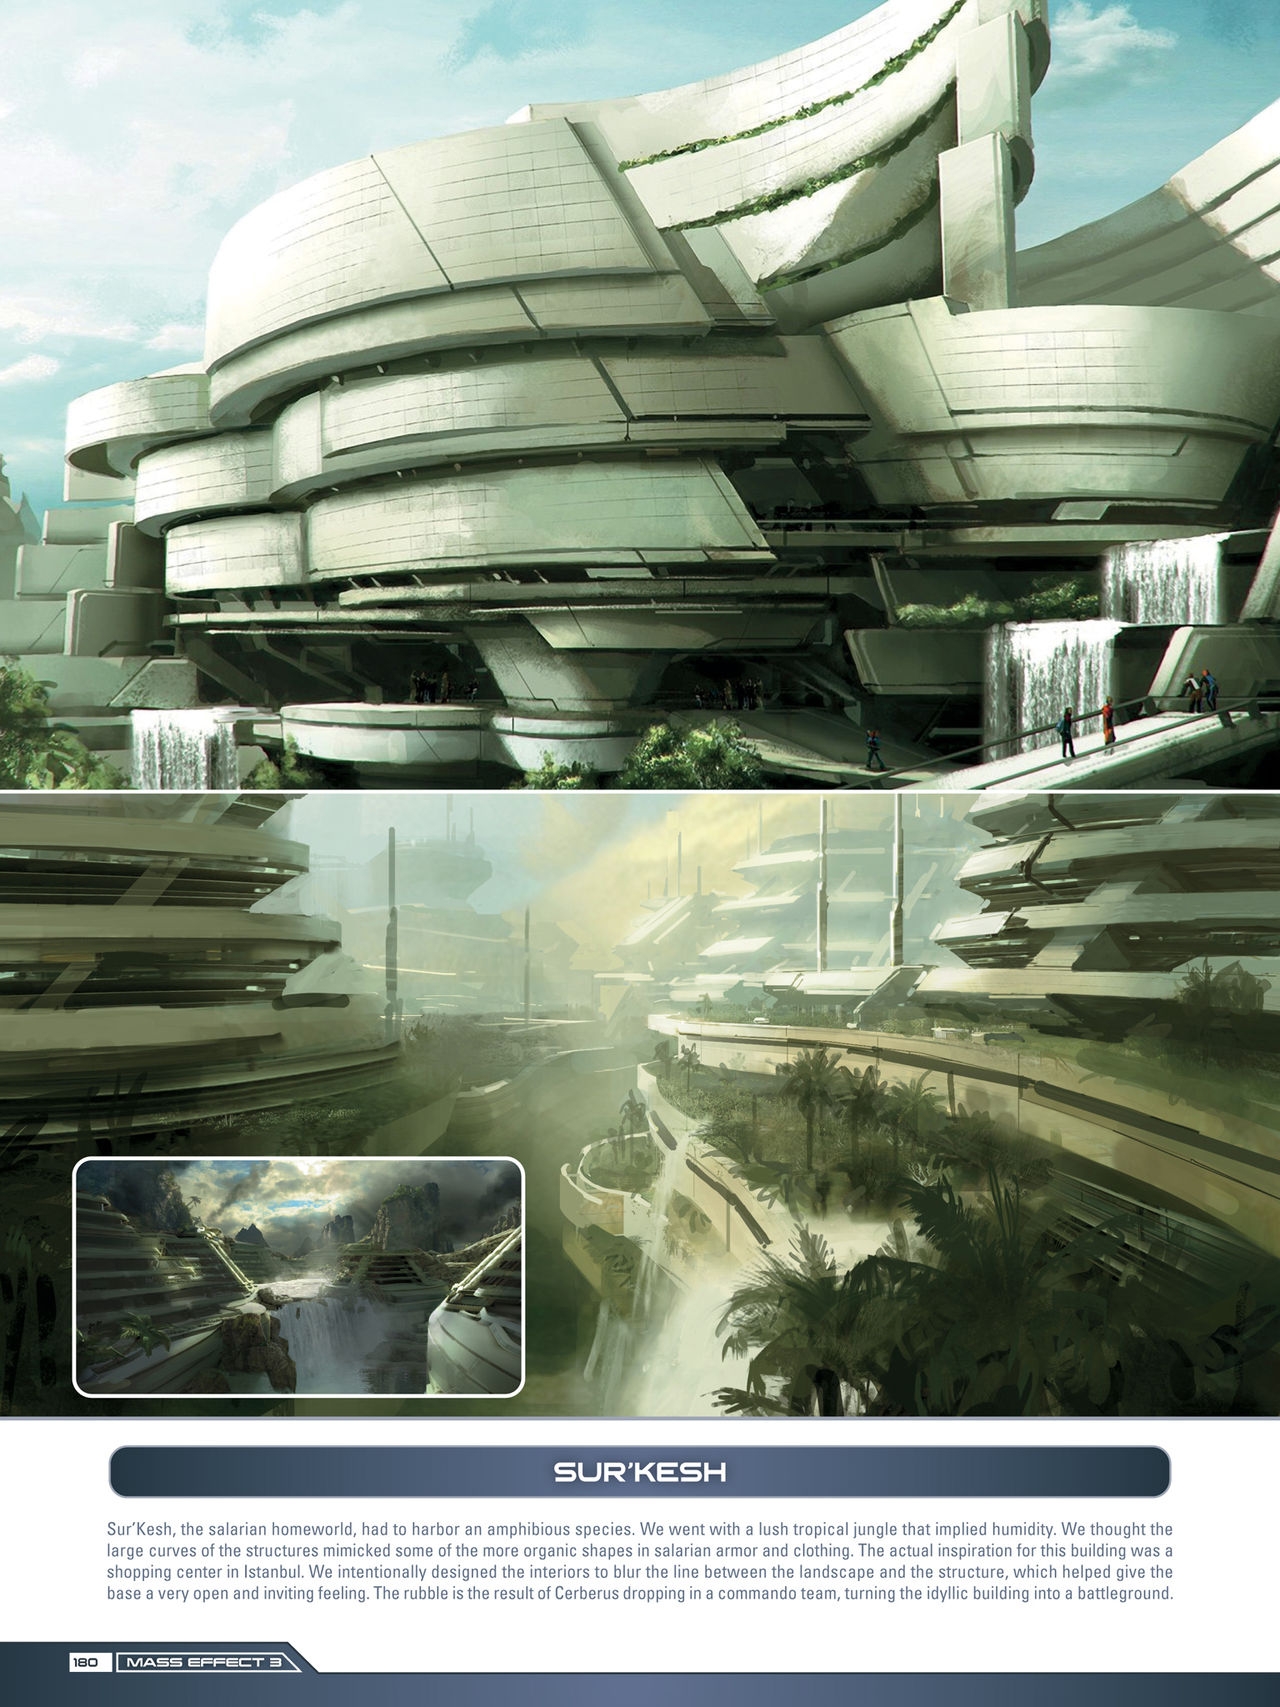 The Art of the Mass Effect Trilogy - Expanded Edition 179